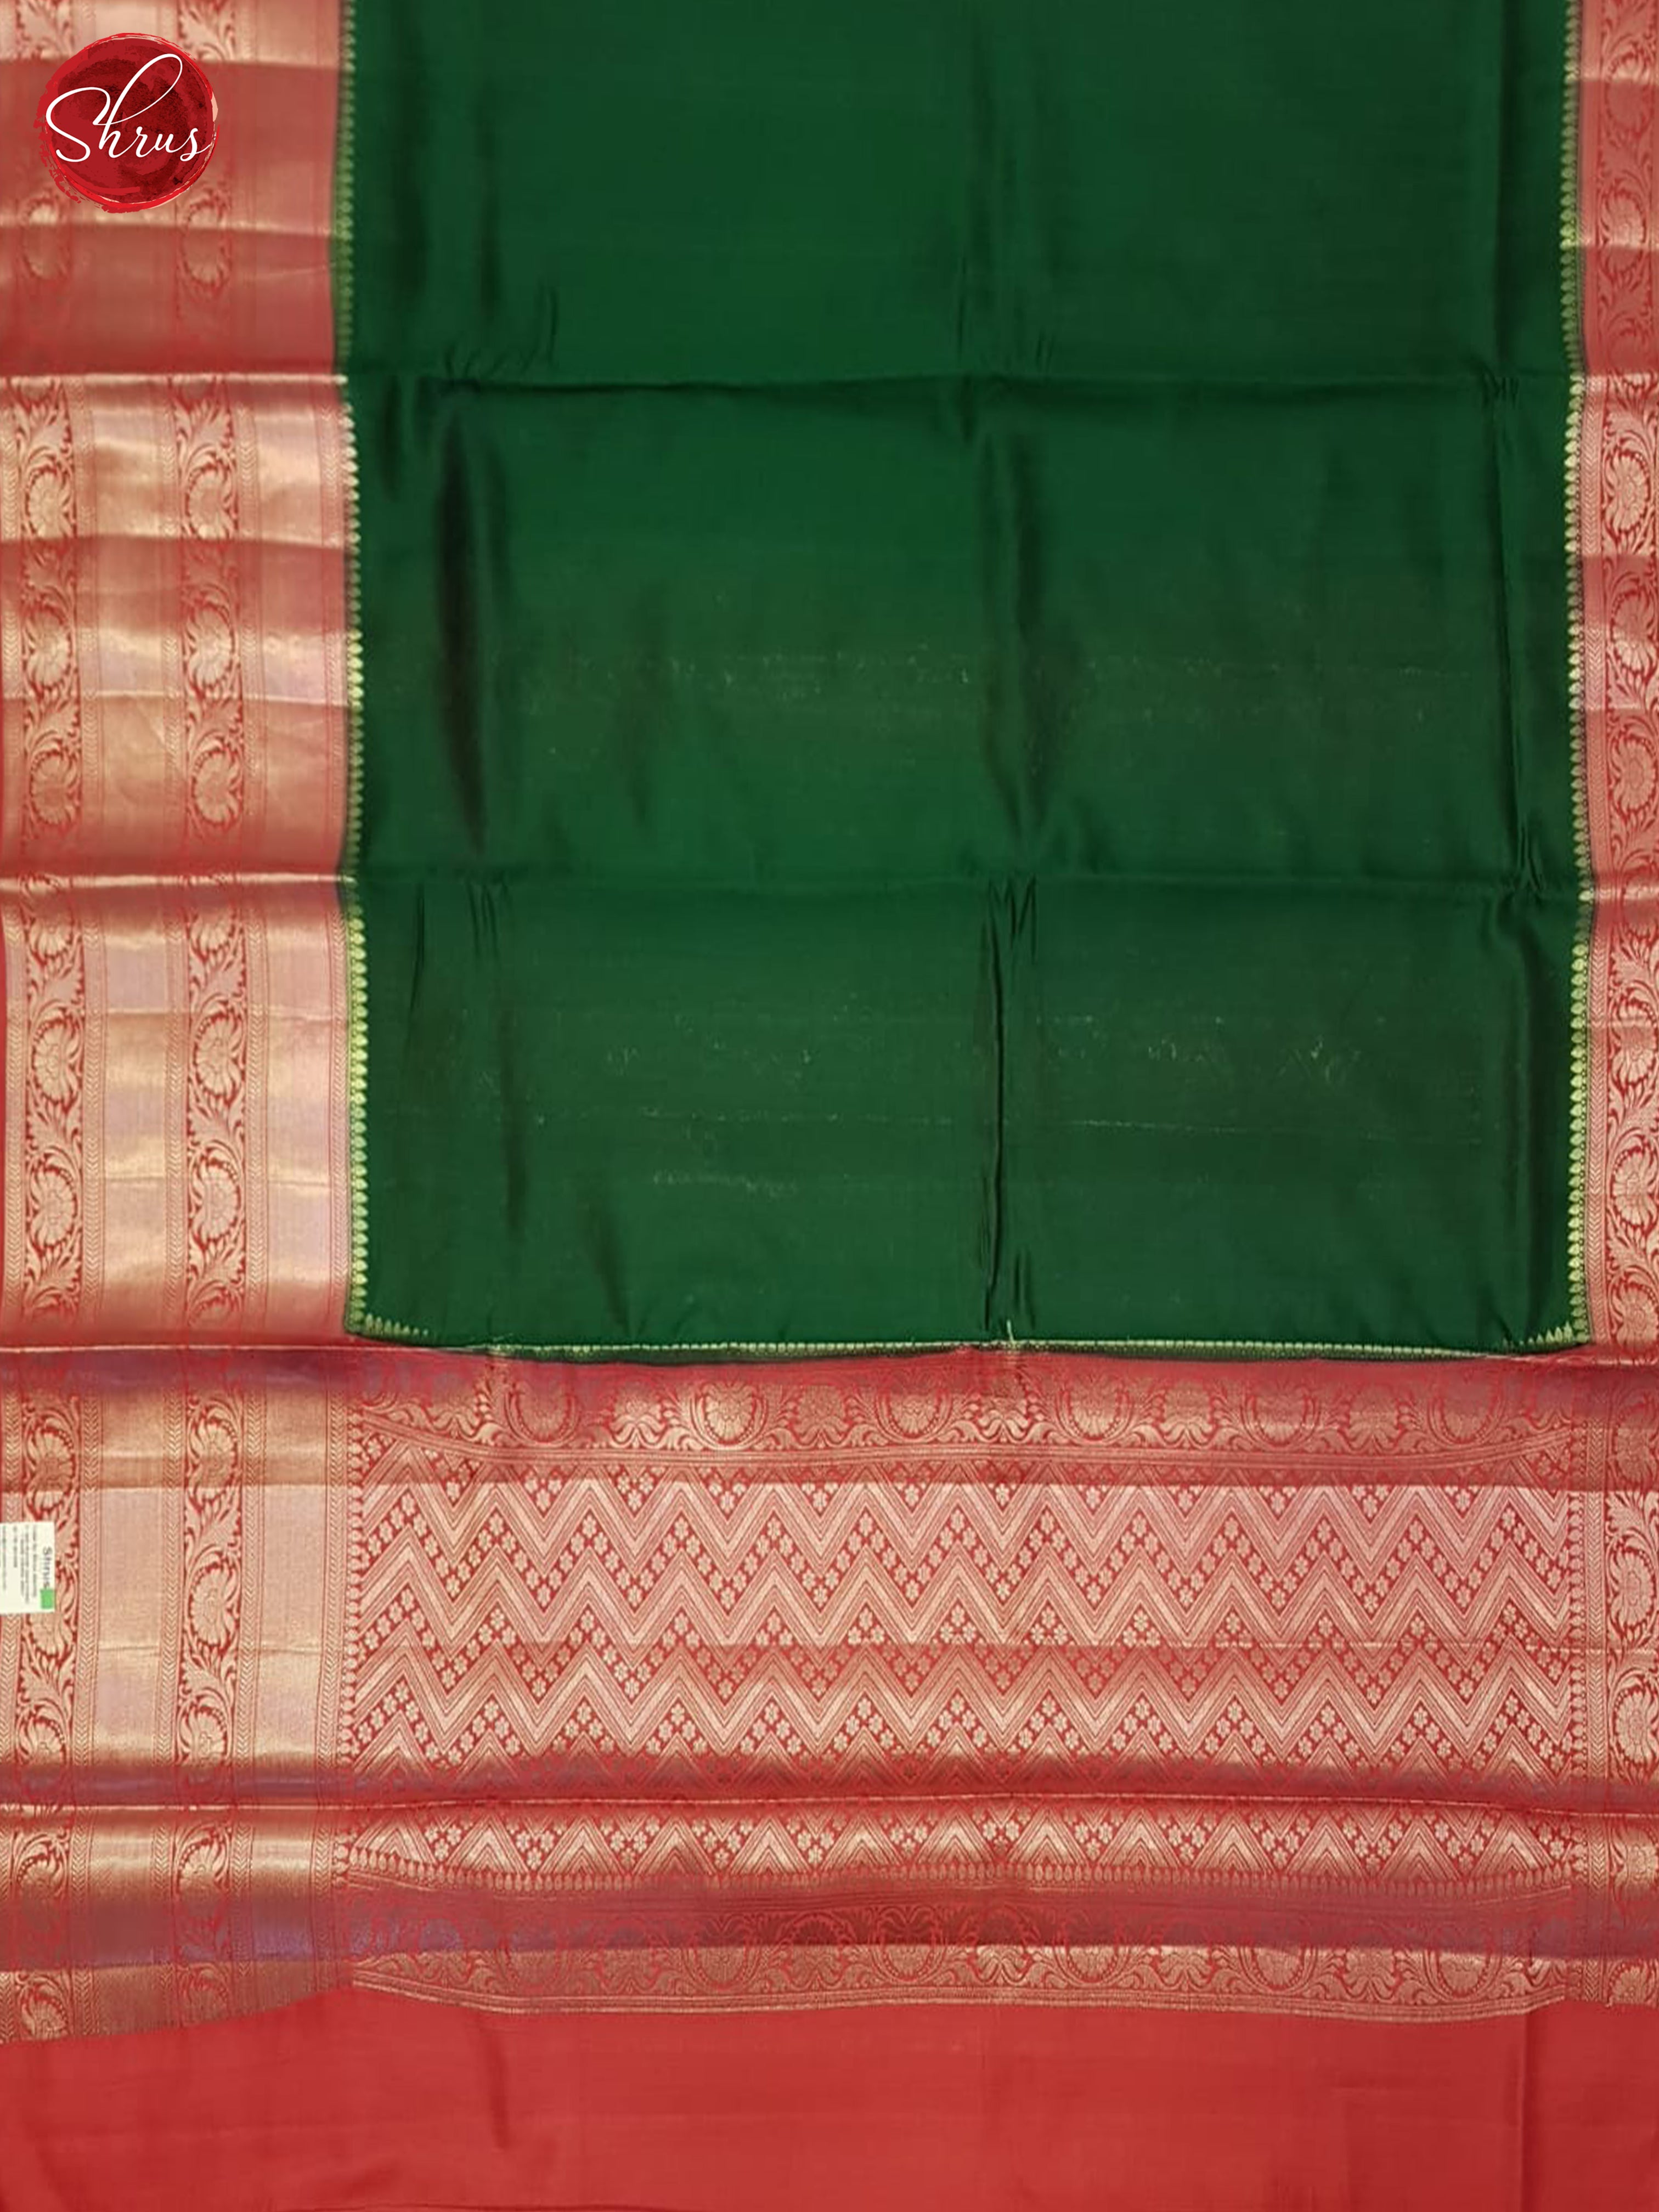 Green And Red- Tussar Sree - Shop on ShrusEternity.com